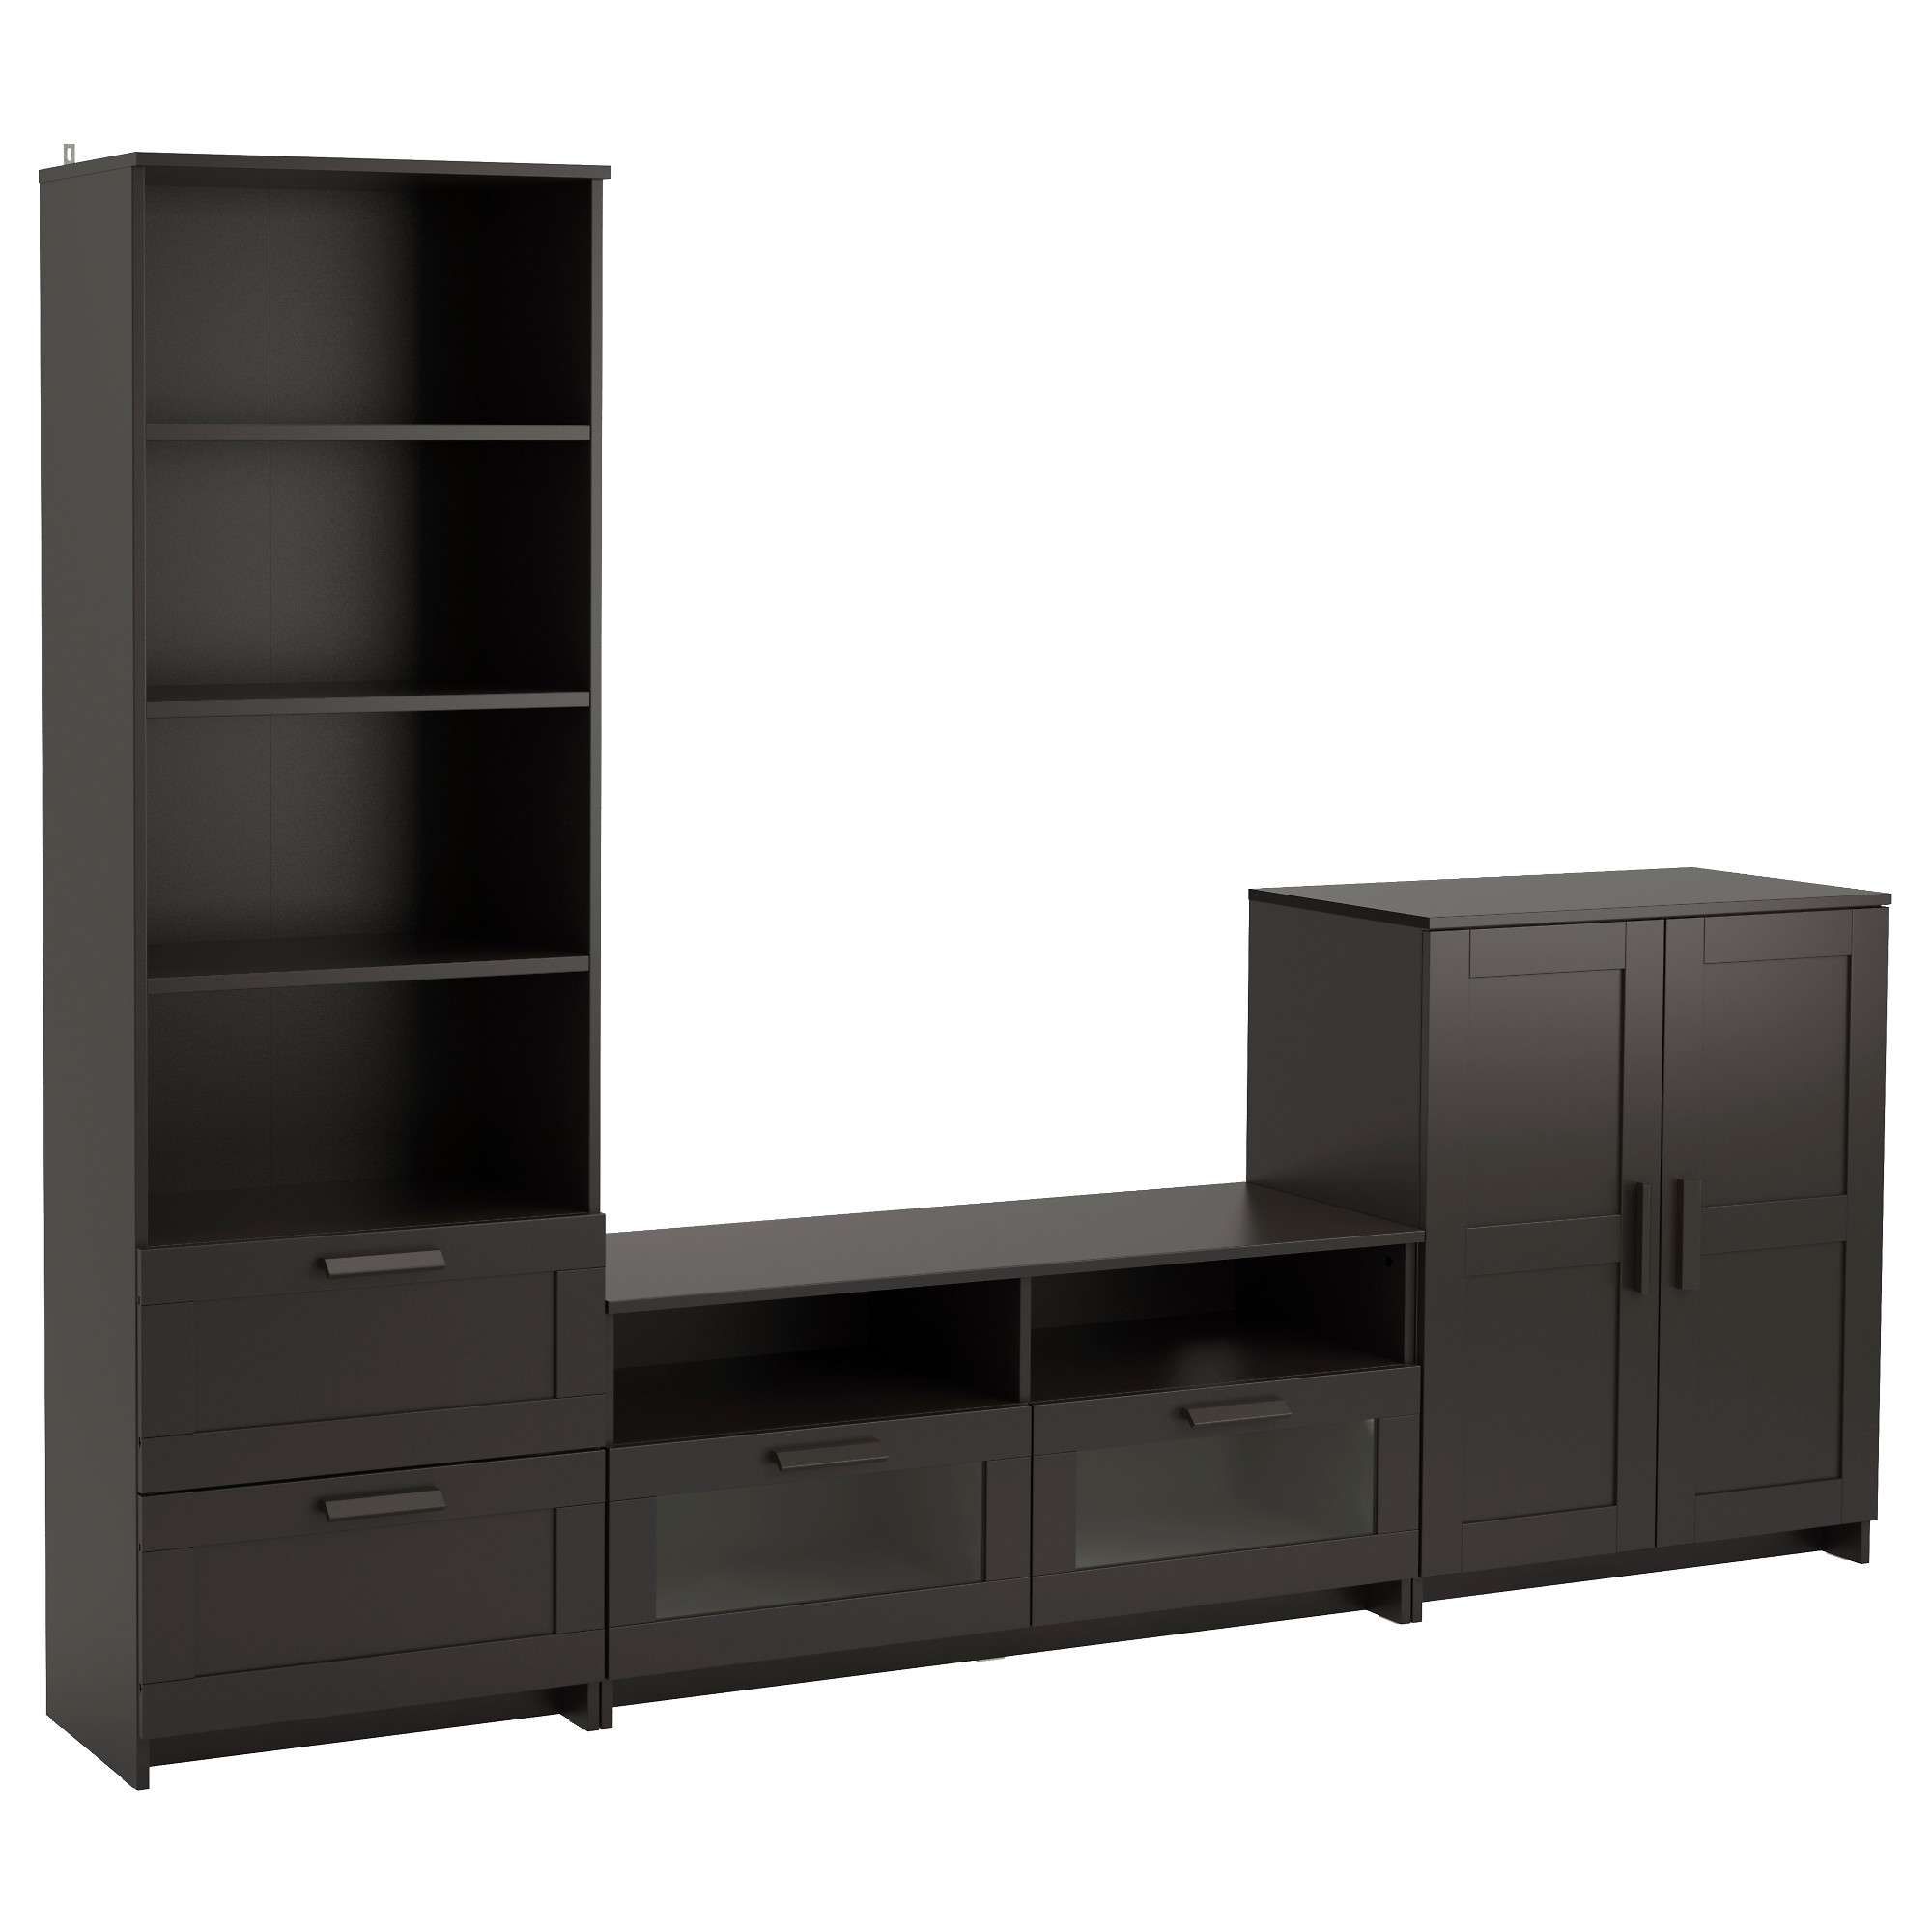 Brimnes Tv Storage Combination Black 260x41x190 Cm – Ikea With Regard To Tv Cabinets With Drawers (View 1 of 20)